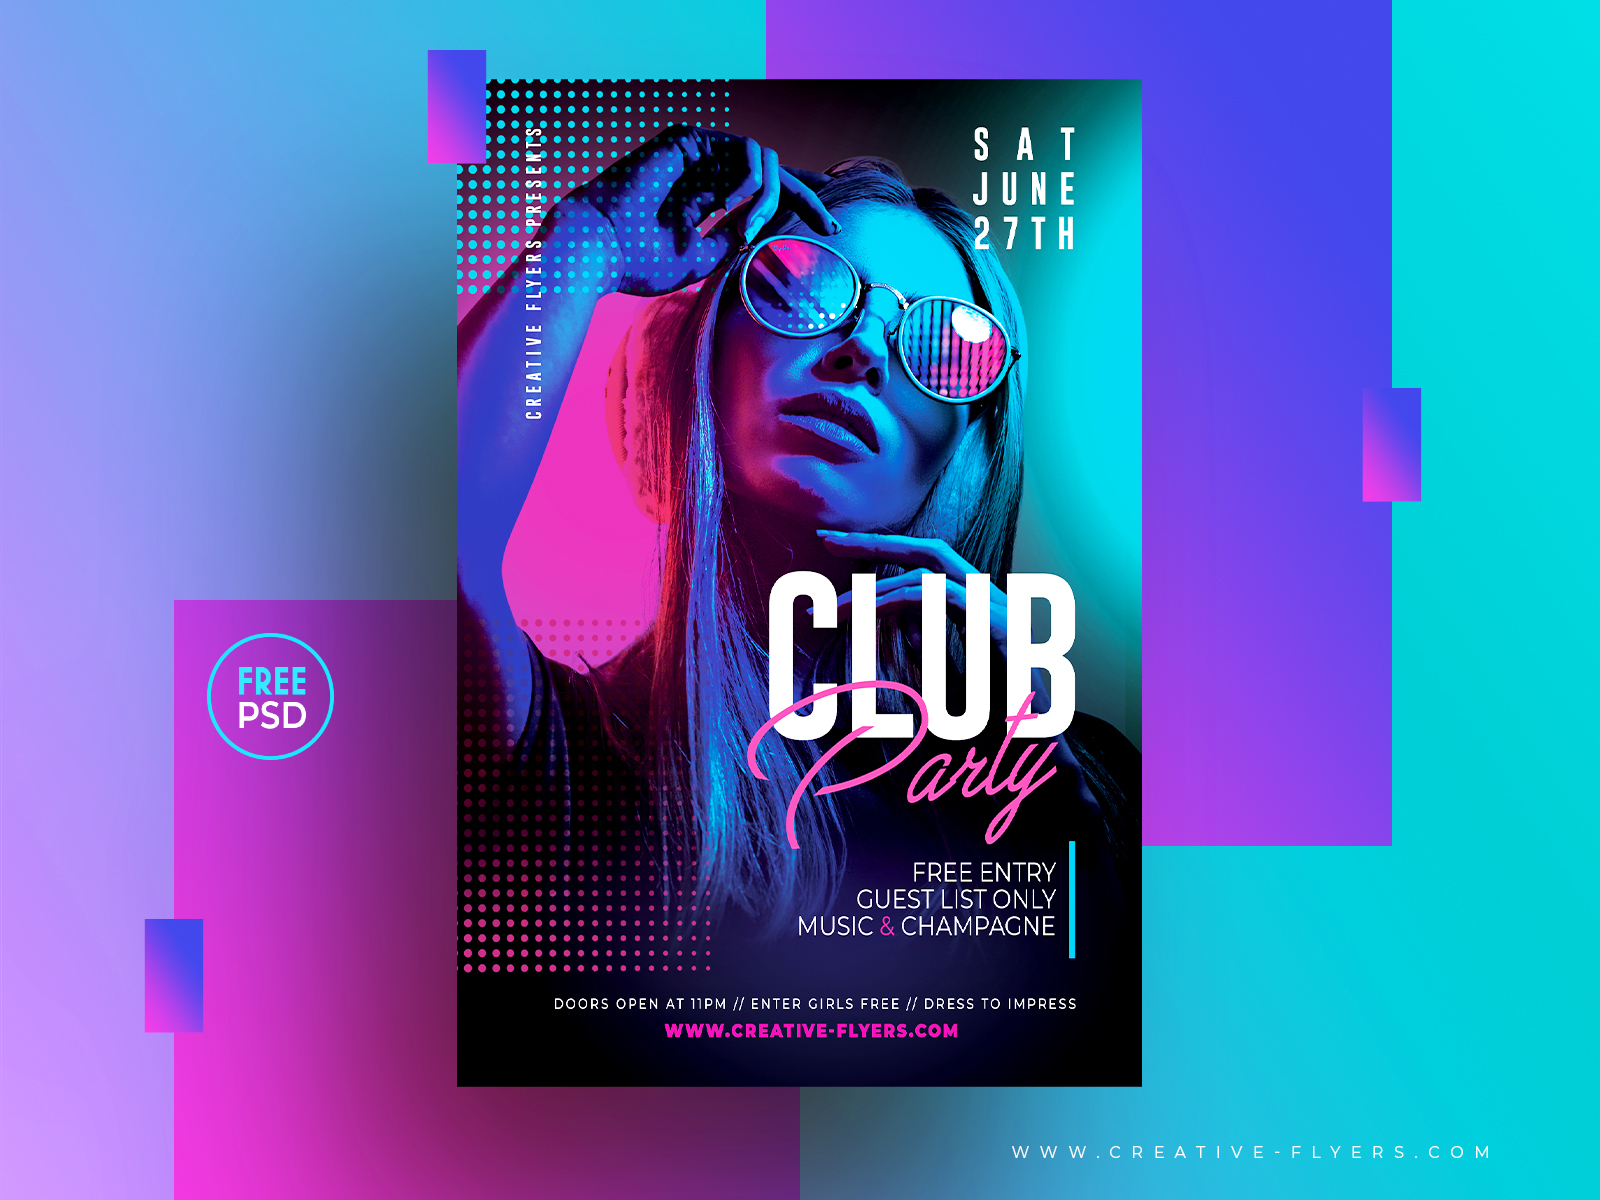 free-psd-flyer-templates-that-are-ready-for-download-you-can-use-this